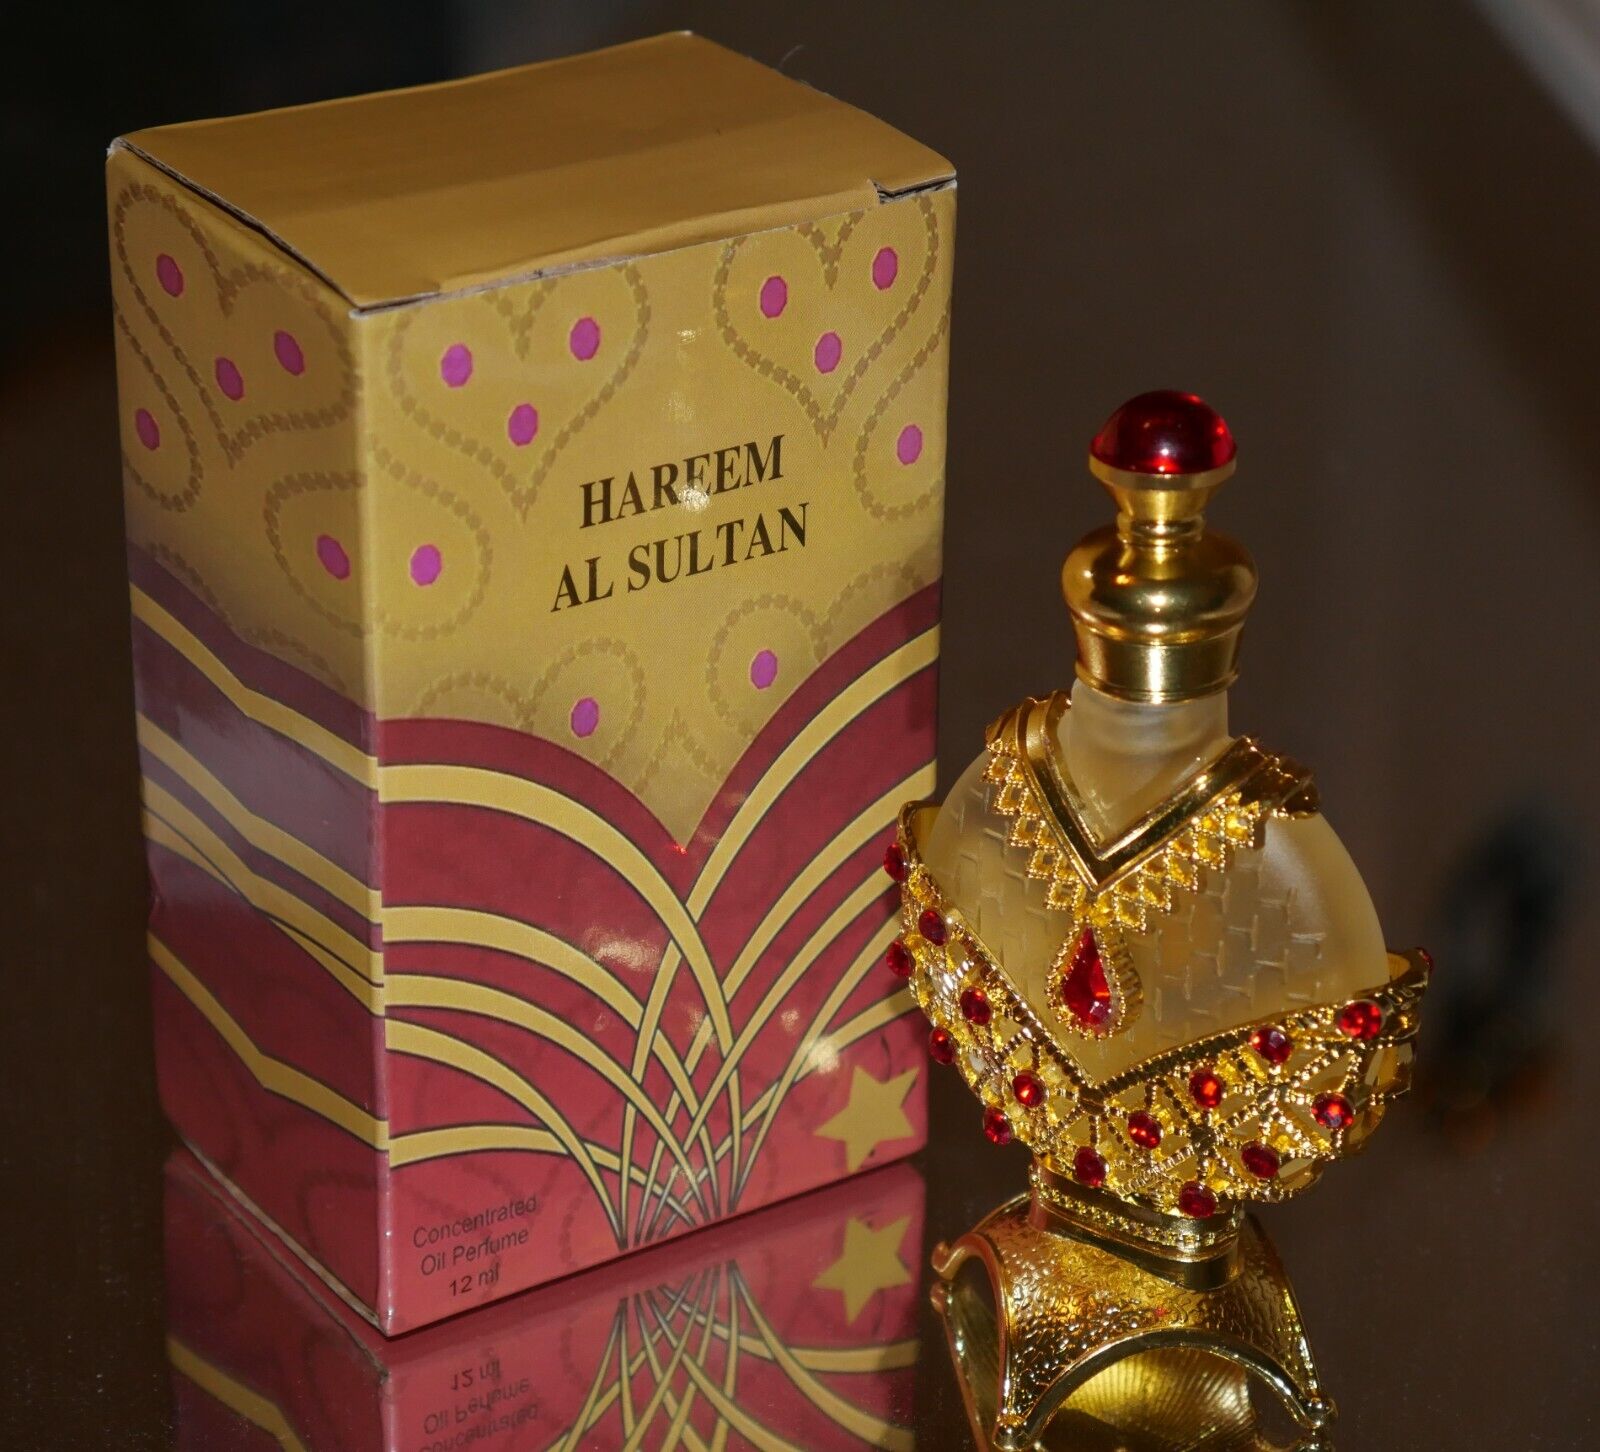 Hareem Al Sultan Gold Arabian Concentrated Perfume Oil for Women Long Lasting US